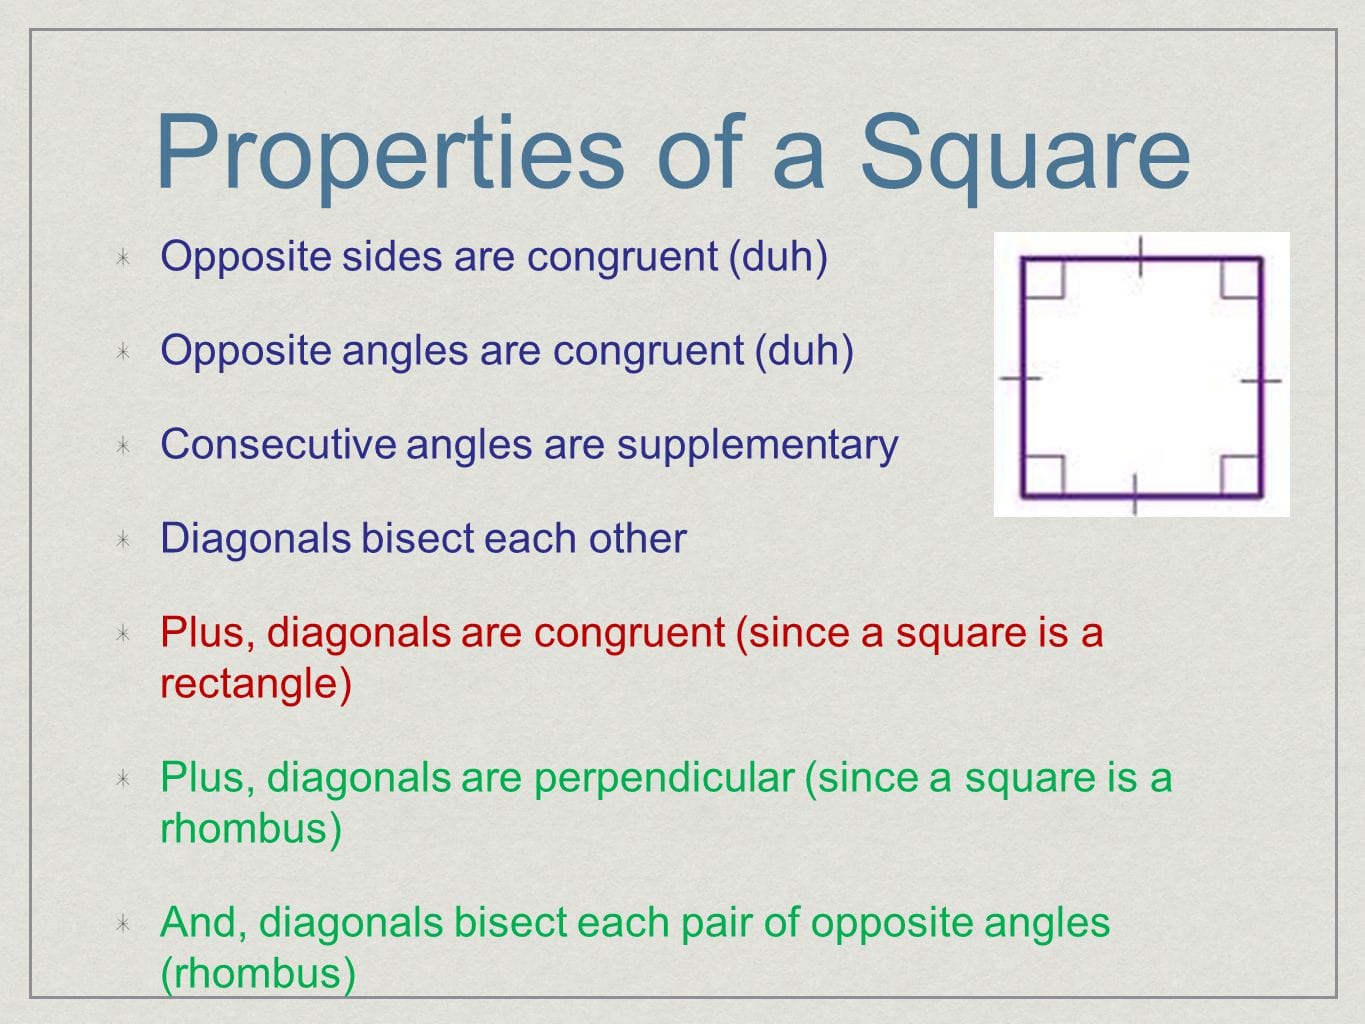 Properties Of Rectangles Rhombuses And Squares Worksheet Answers — db